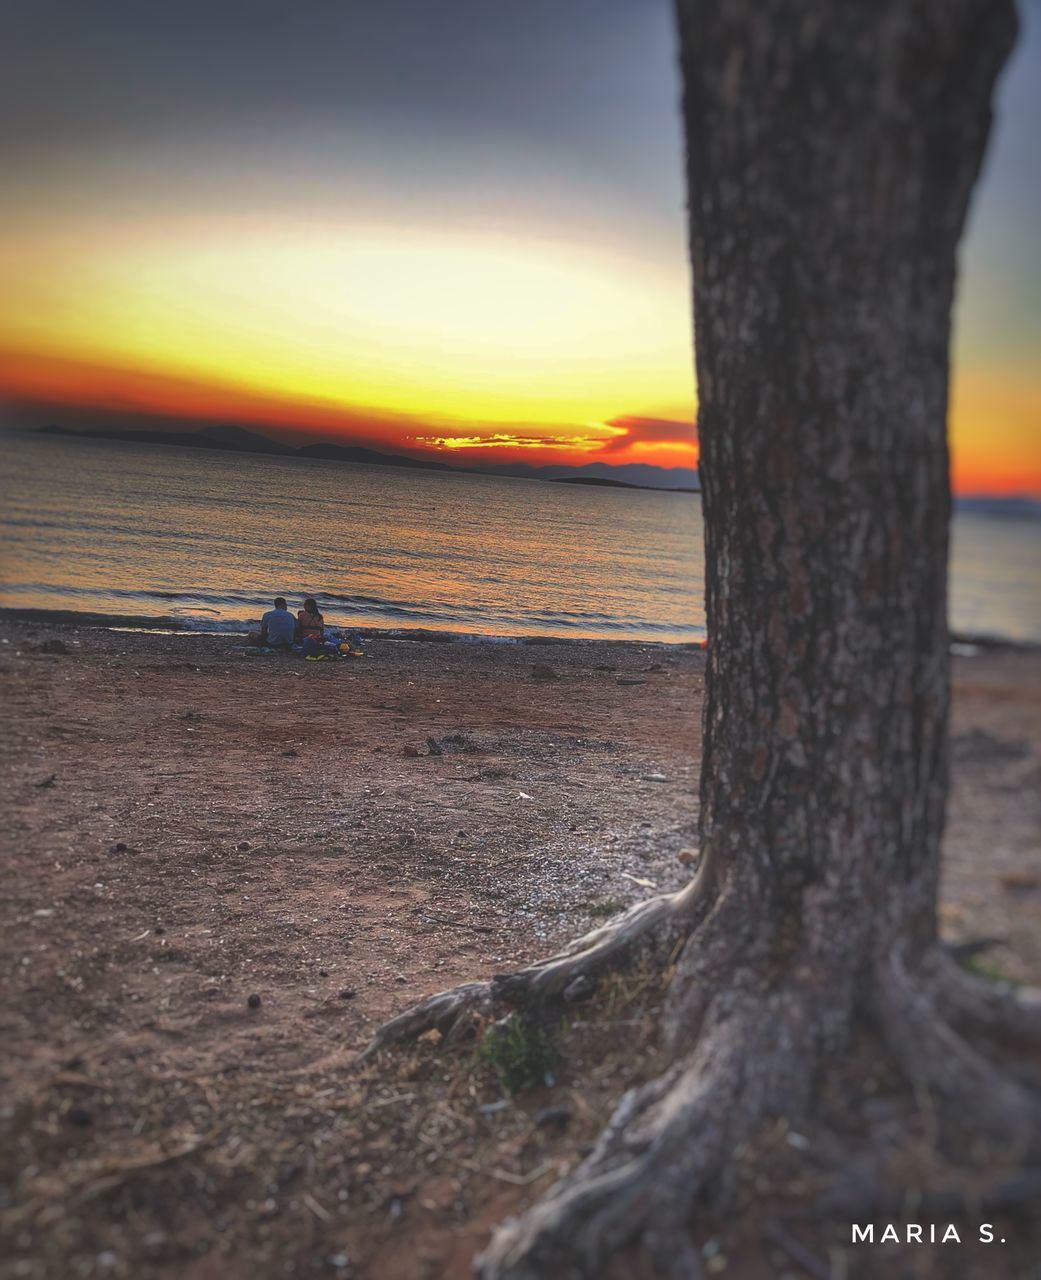 sky, sunset, land, sea, beach, water, nature, tree trunk, trunk, scenics - nature, beauty in nature, tree, horizon over water, sunlight, tranquility, horizon, tranquil scene, cloud, orange color, outdoors, plant, no people, evening, ocean, shore, reflection, sand, idyllic, wood, sun, environment, travel destinations